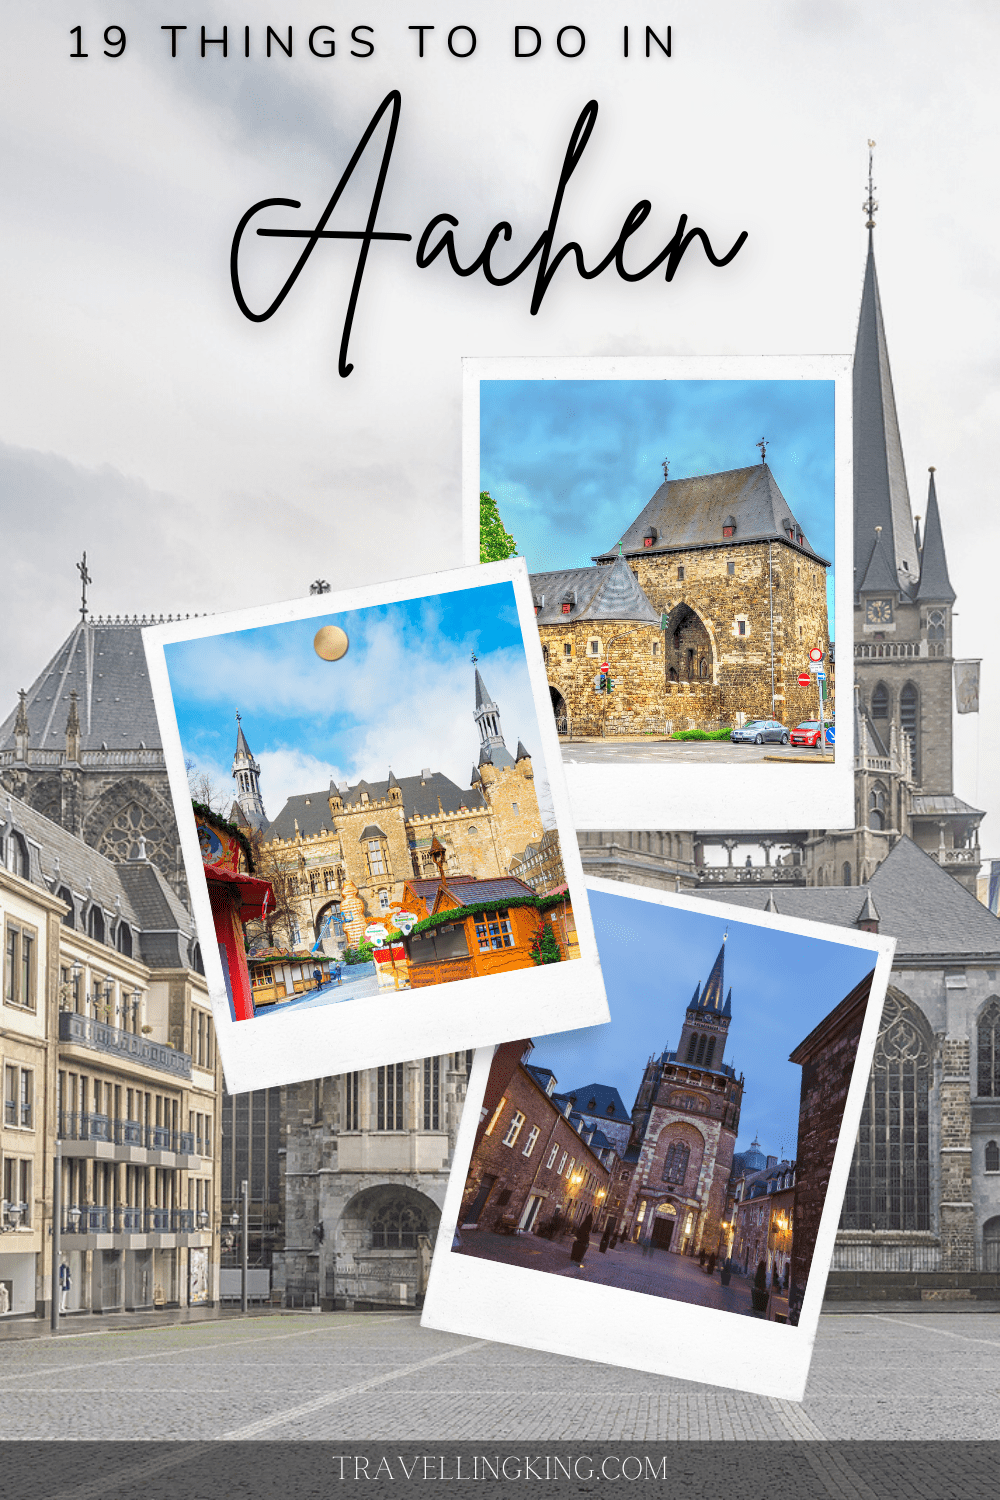 19 Things to do in Aachen